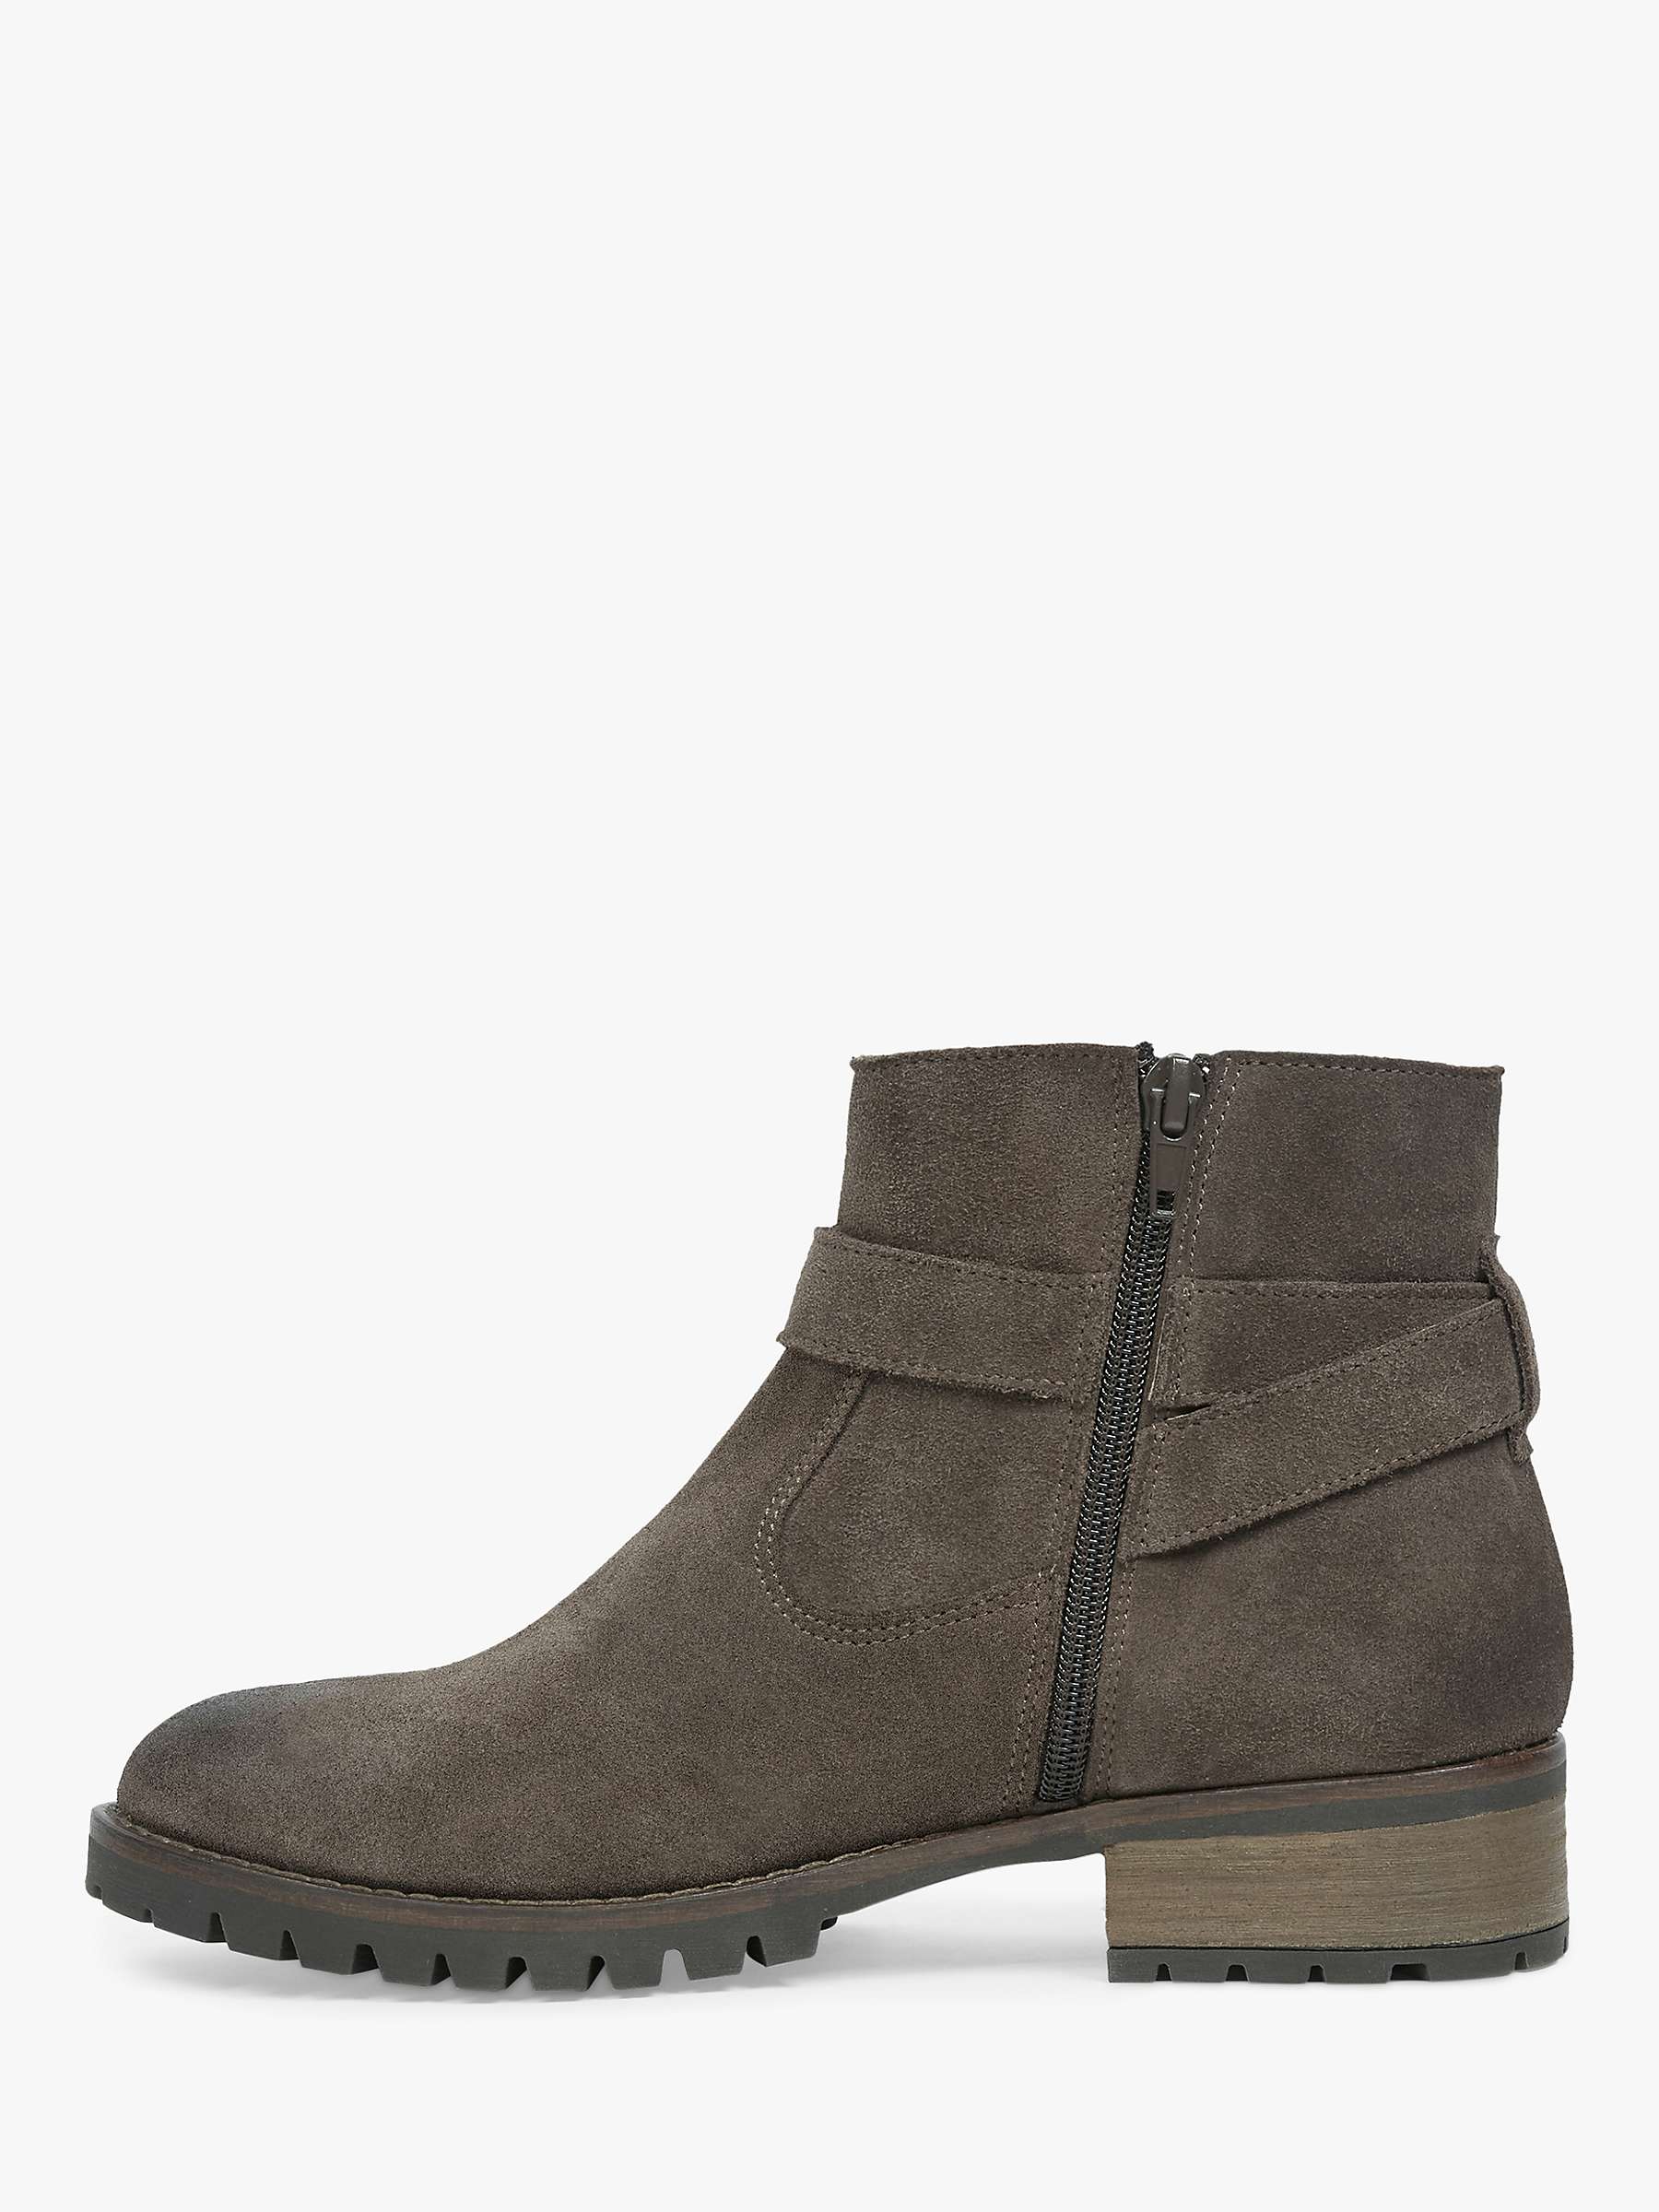 Buy Celtic & Co. Strap Detail Suede Ankle Boots, Tanners Brown Online at johnlewis.com